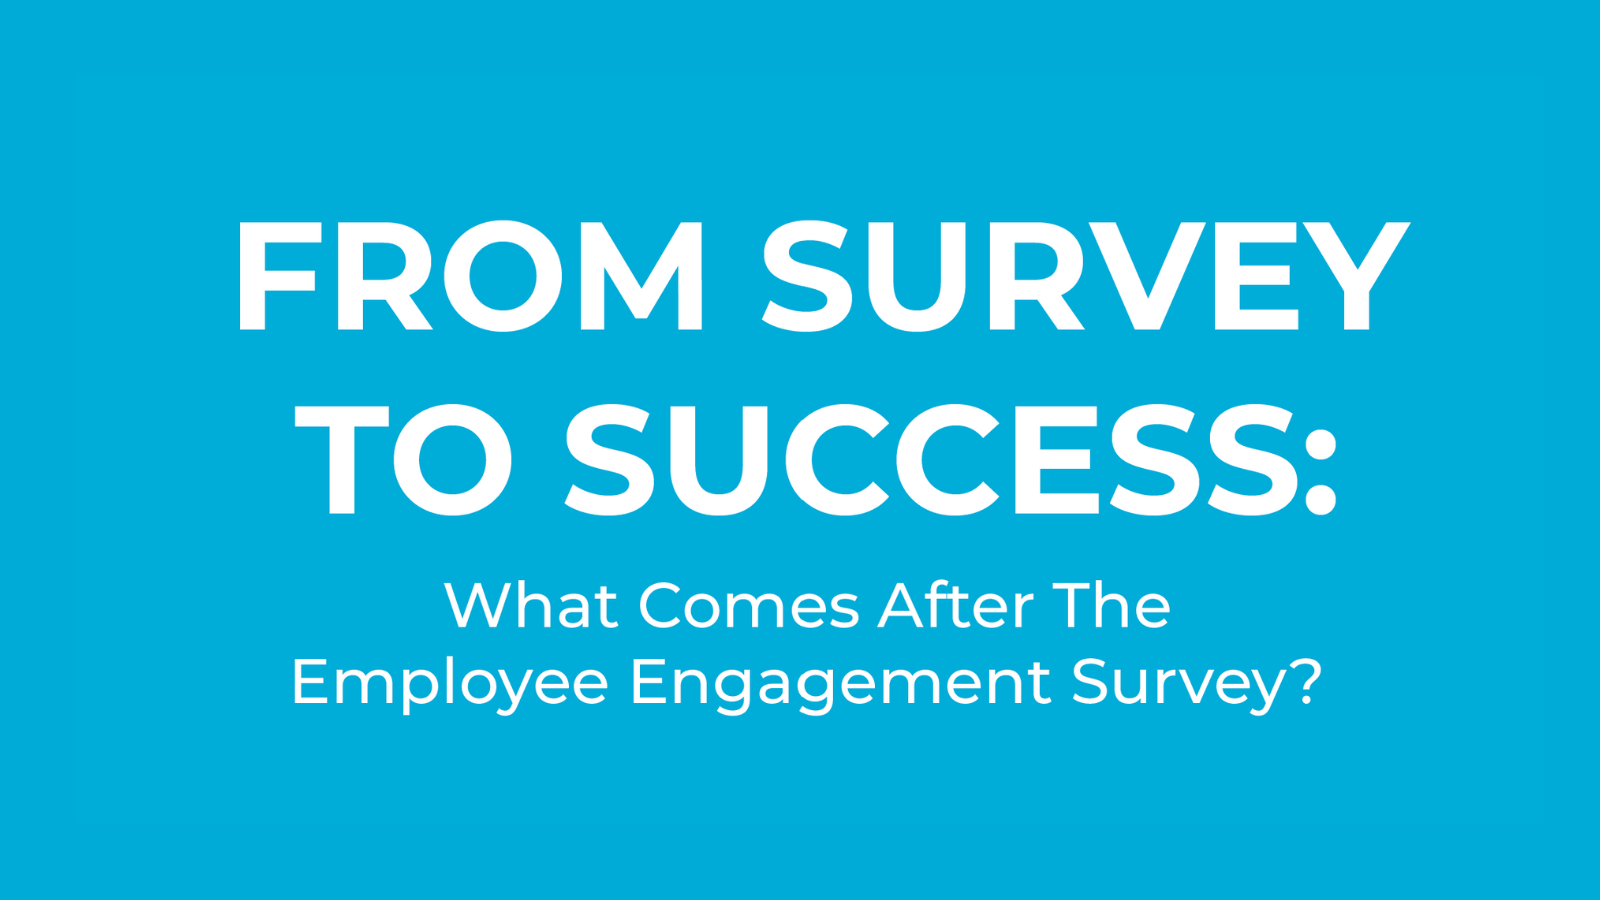 [Infographic] What Comes After The Employee Engagement Survey